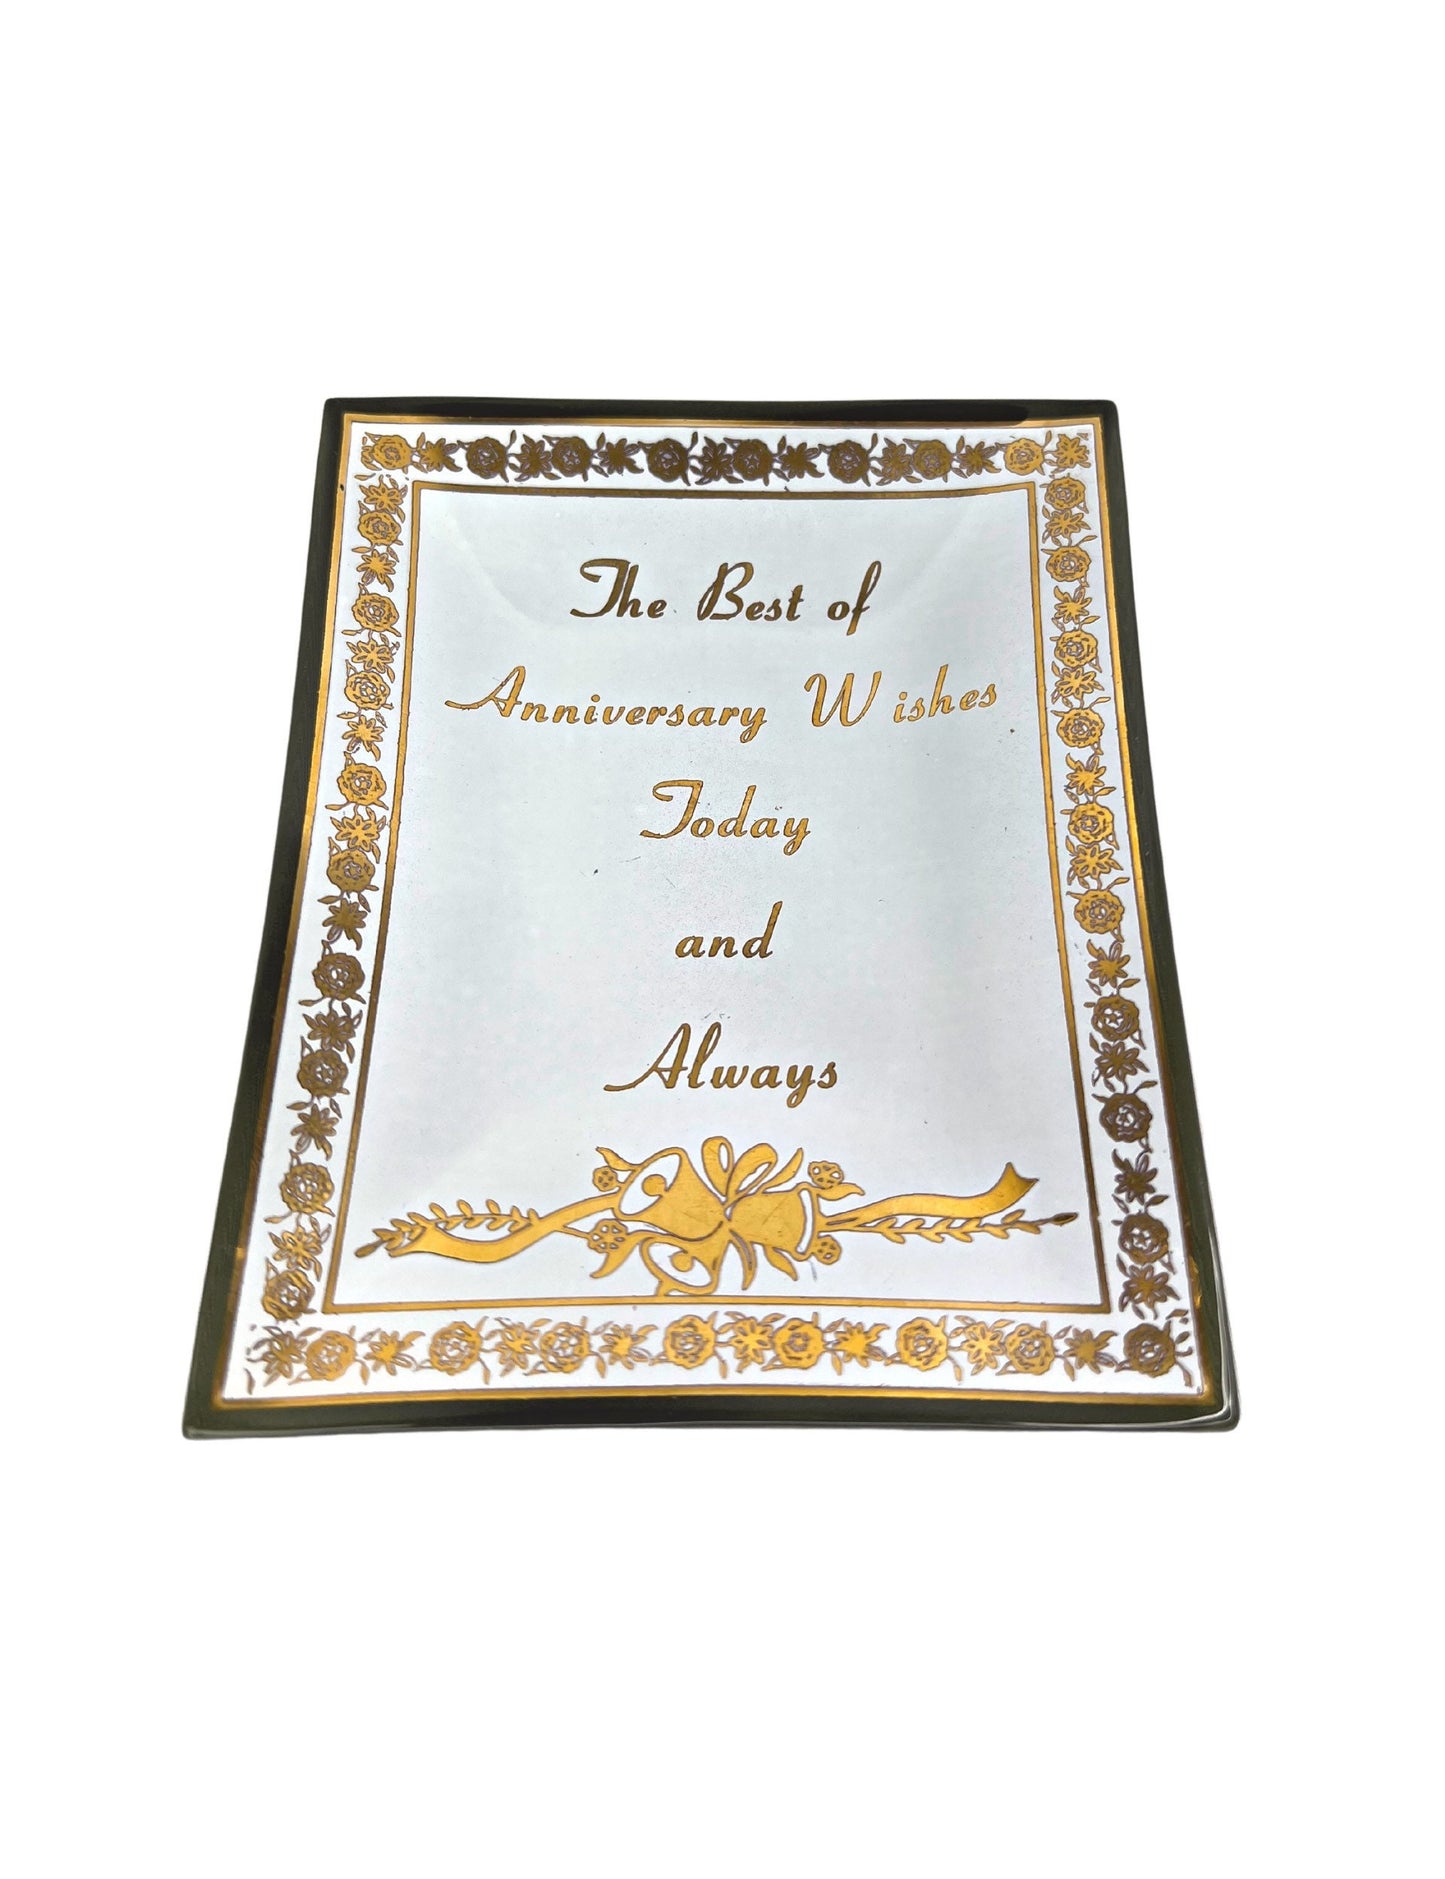 80’s Hallmark Cards Best of Anniversary Wishes -Today & Always Ceramic Greeting Card Love Wedding Bells Beveled Small Dish 5” x 4”